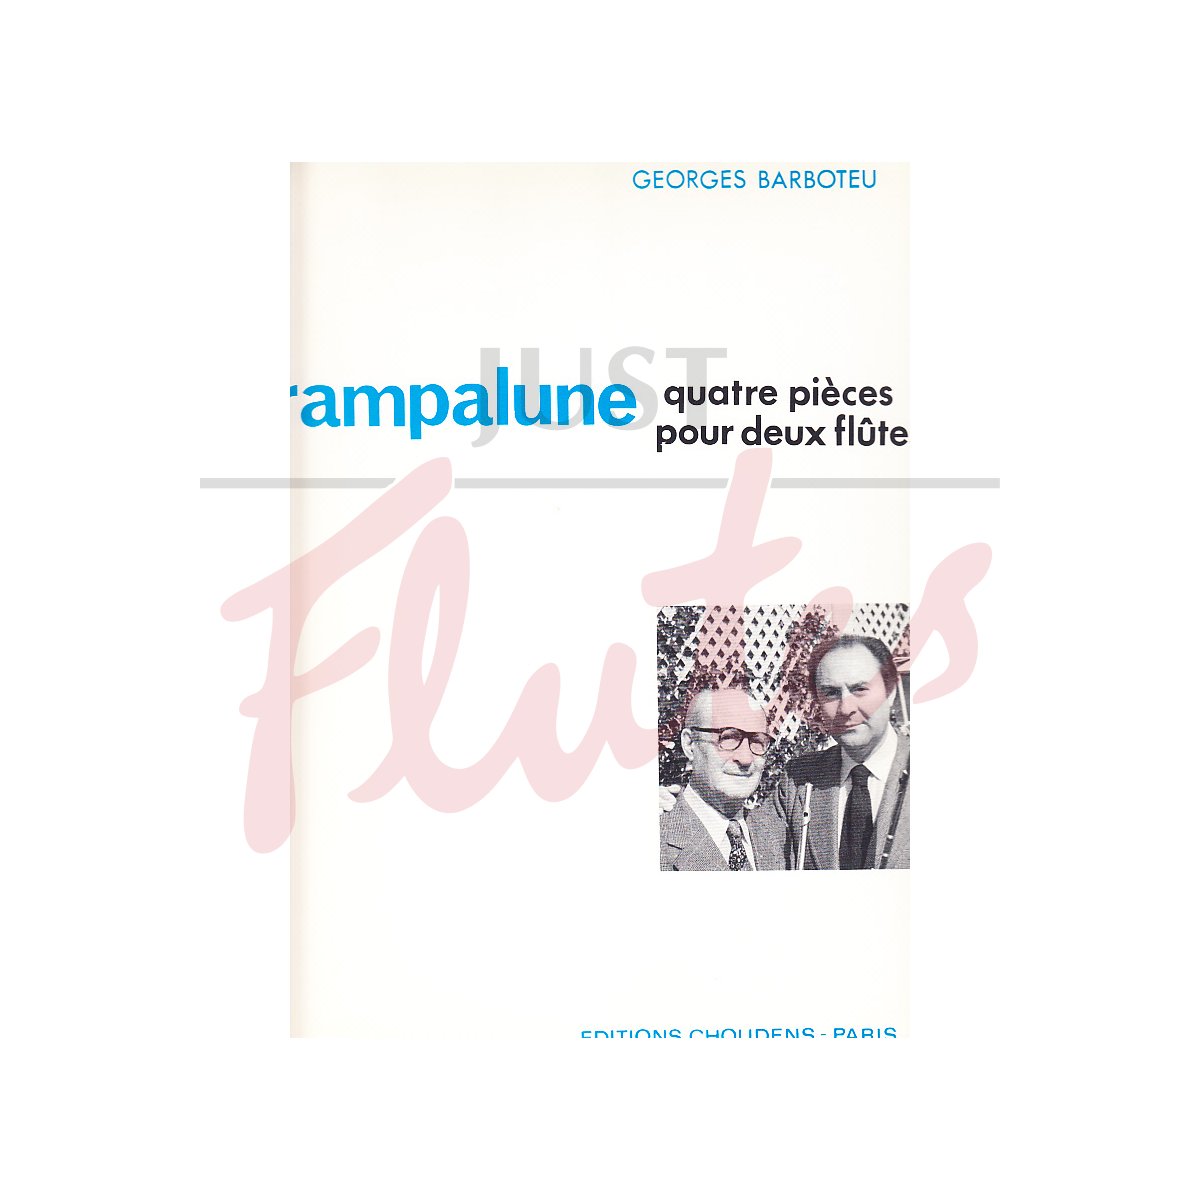 Rampalune: 4 Pieces for Two Flutes